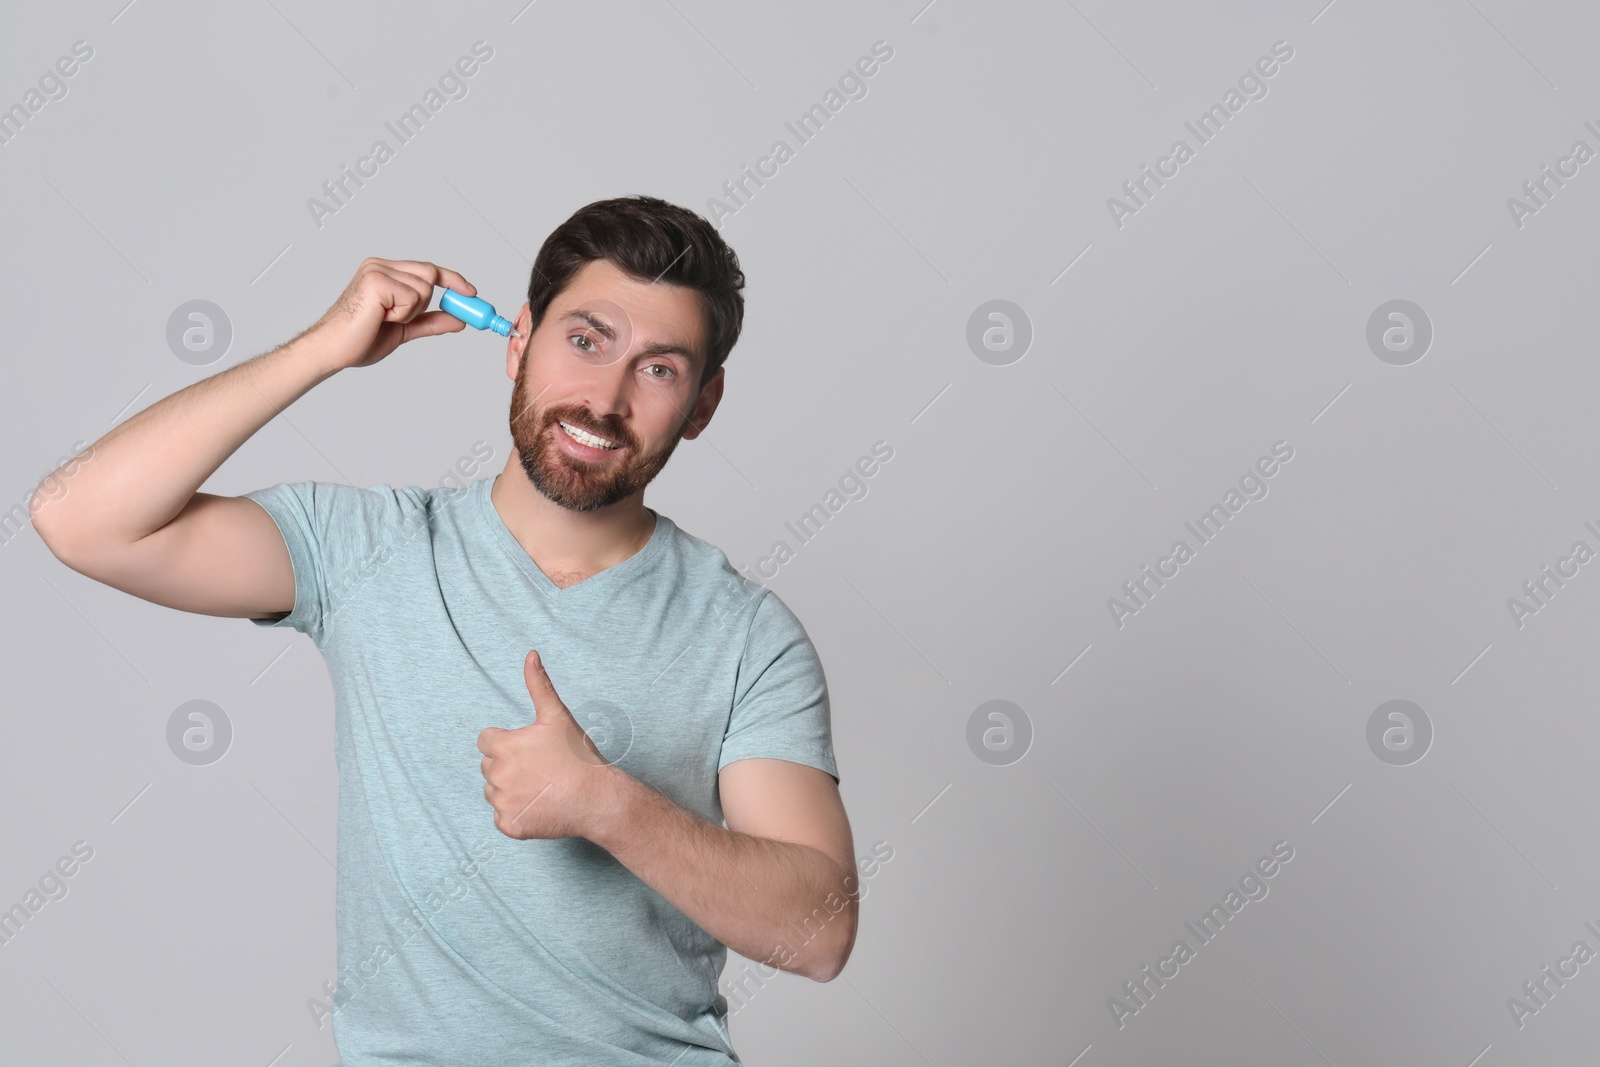 Photo of Man using ear drops and showing thumbs up on grey background, space for text